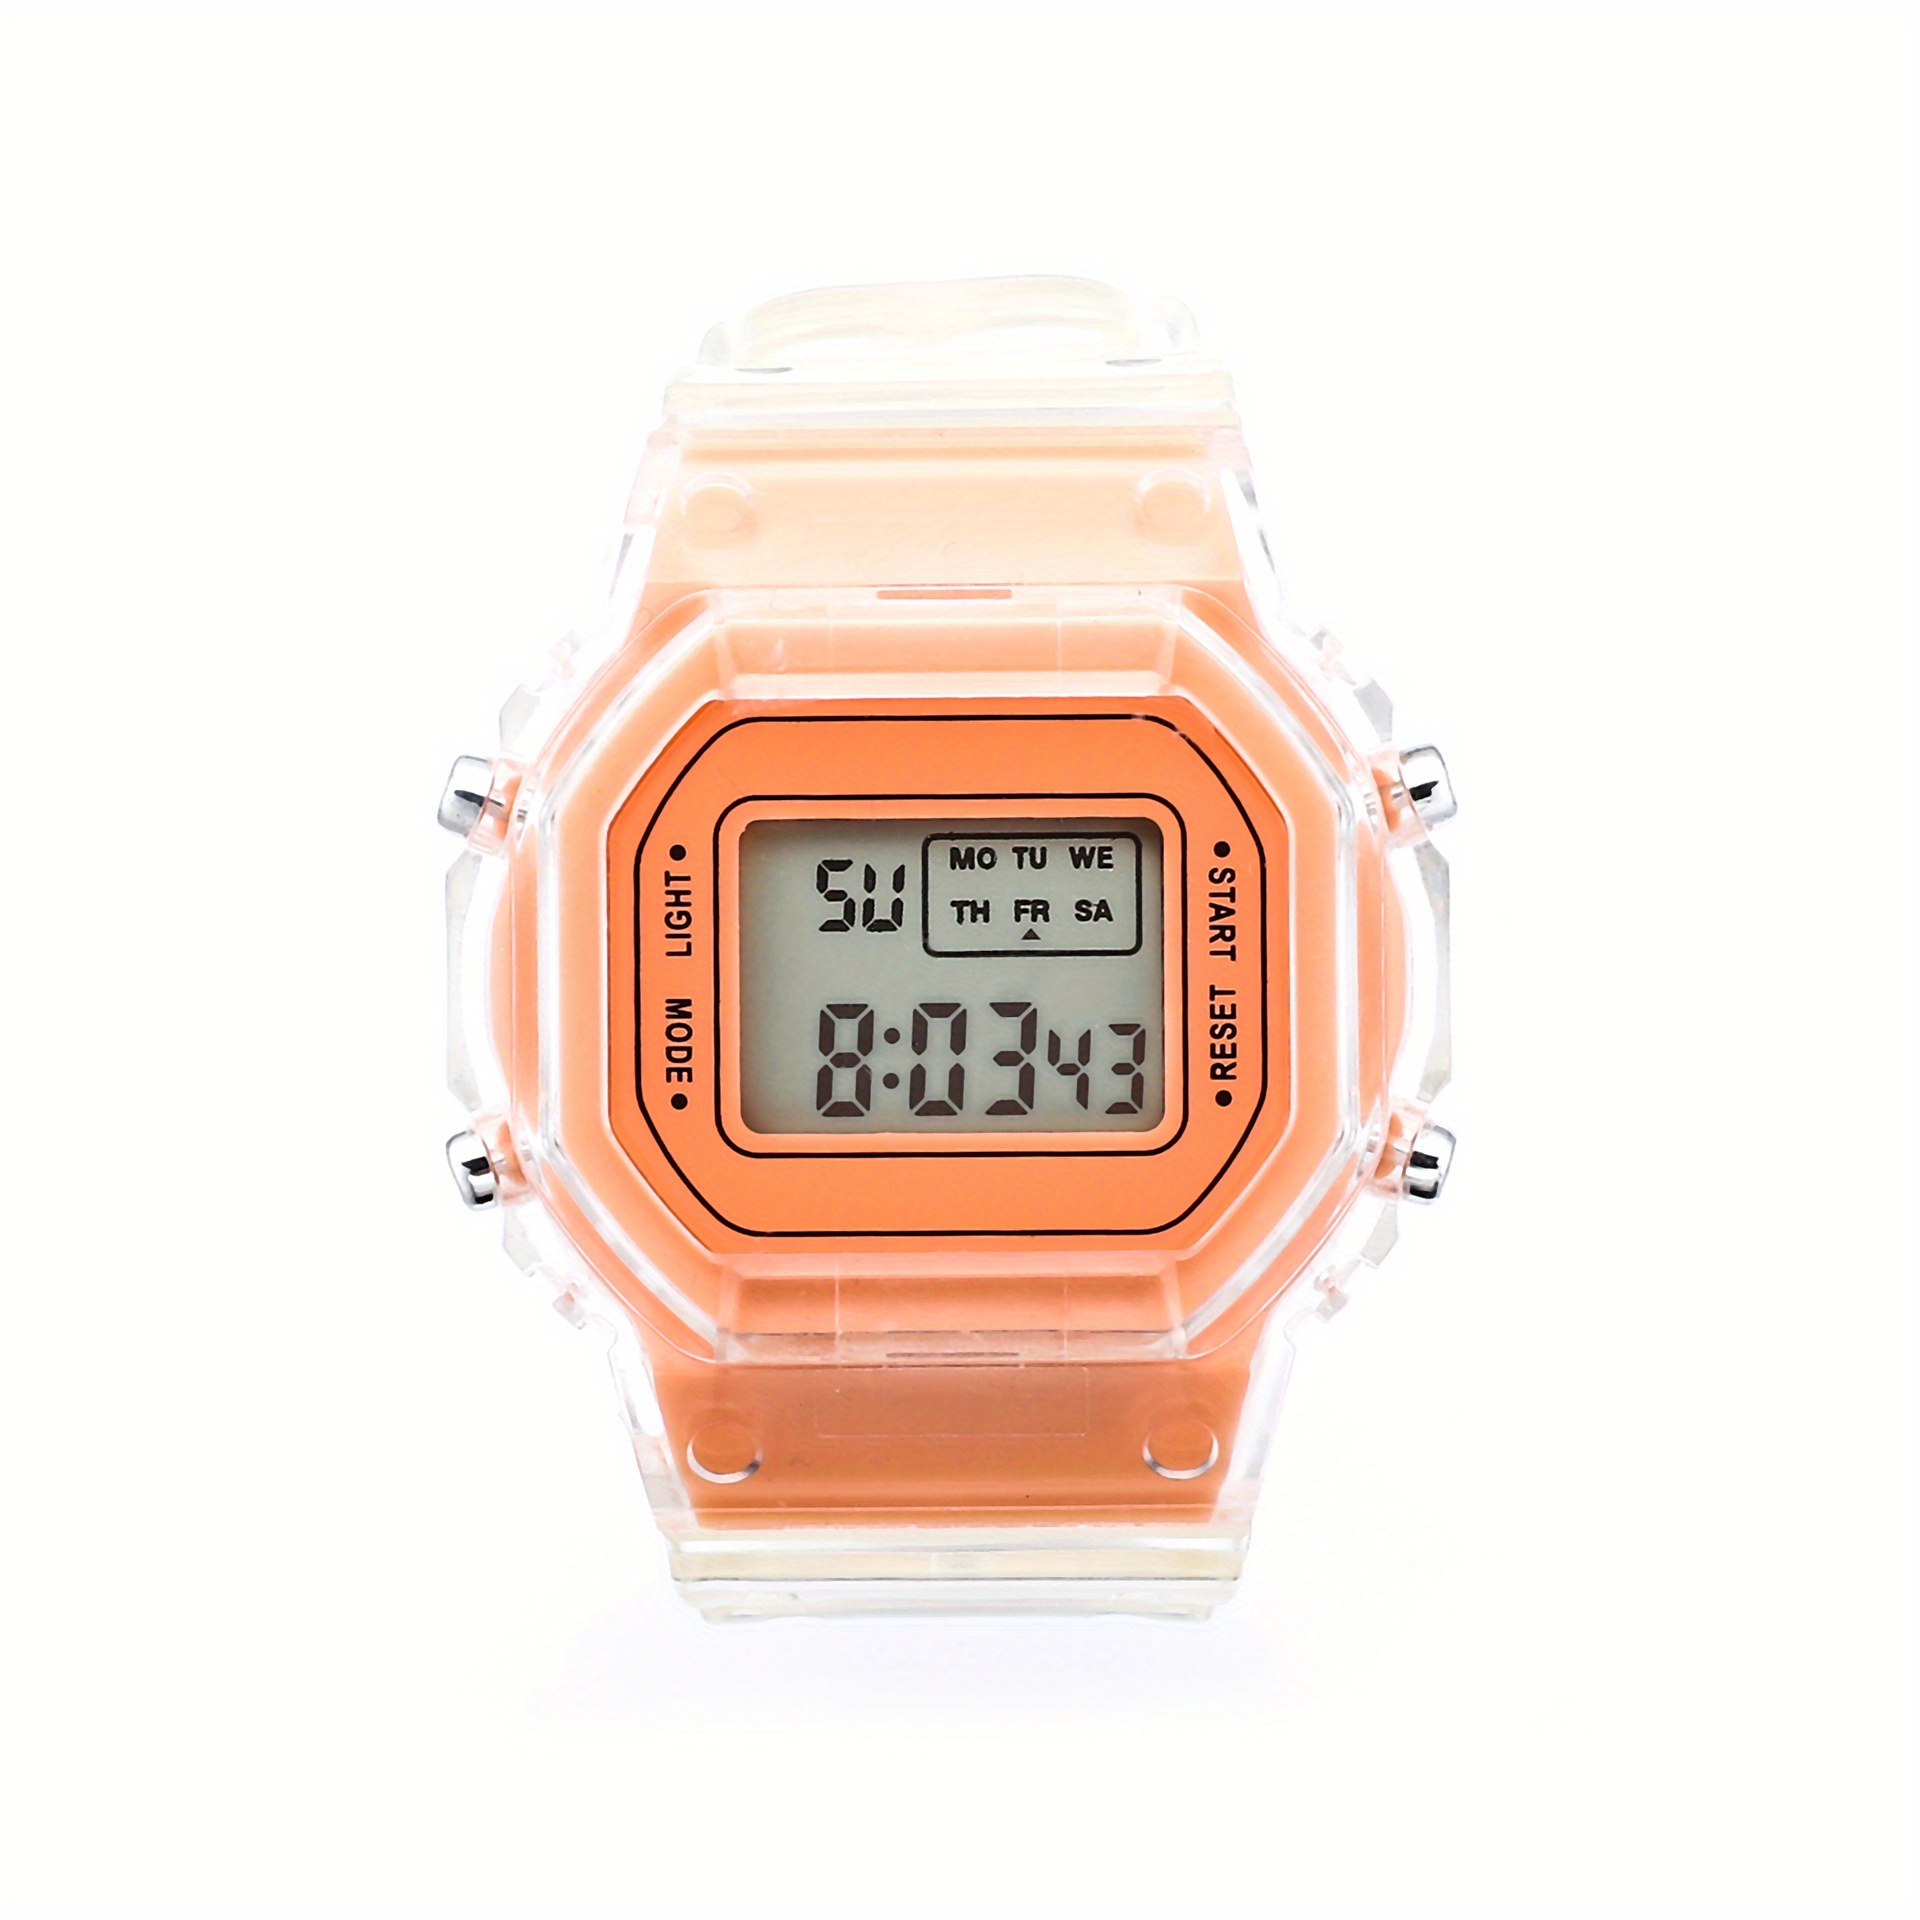 New Square Electronic Watch Men and Women Student Sports Children's LED  Digital Watch Non-smart Watch Dropshipping